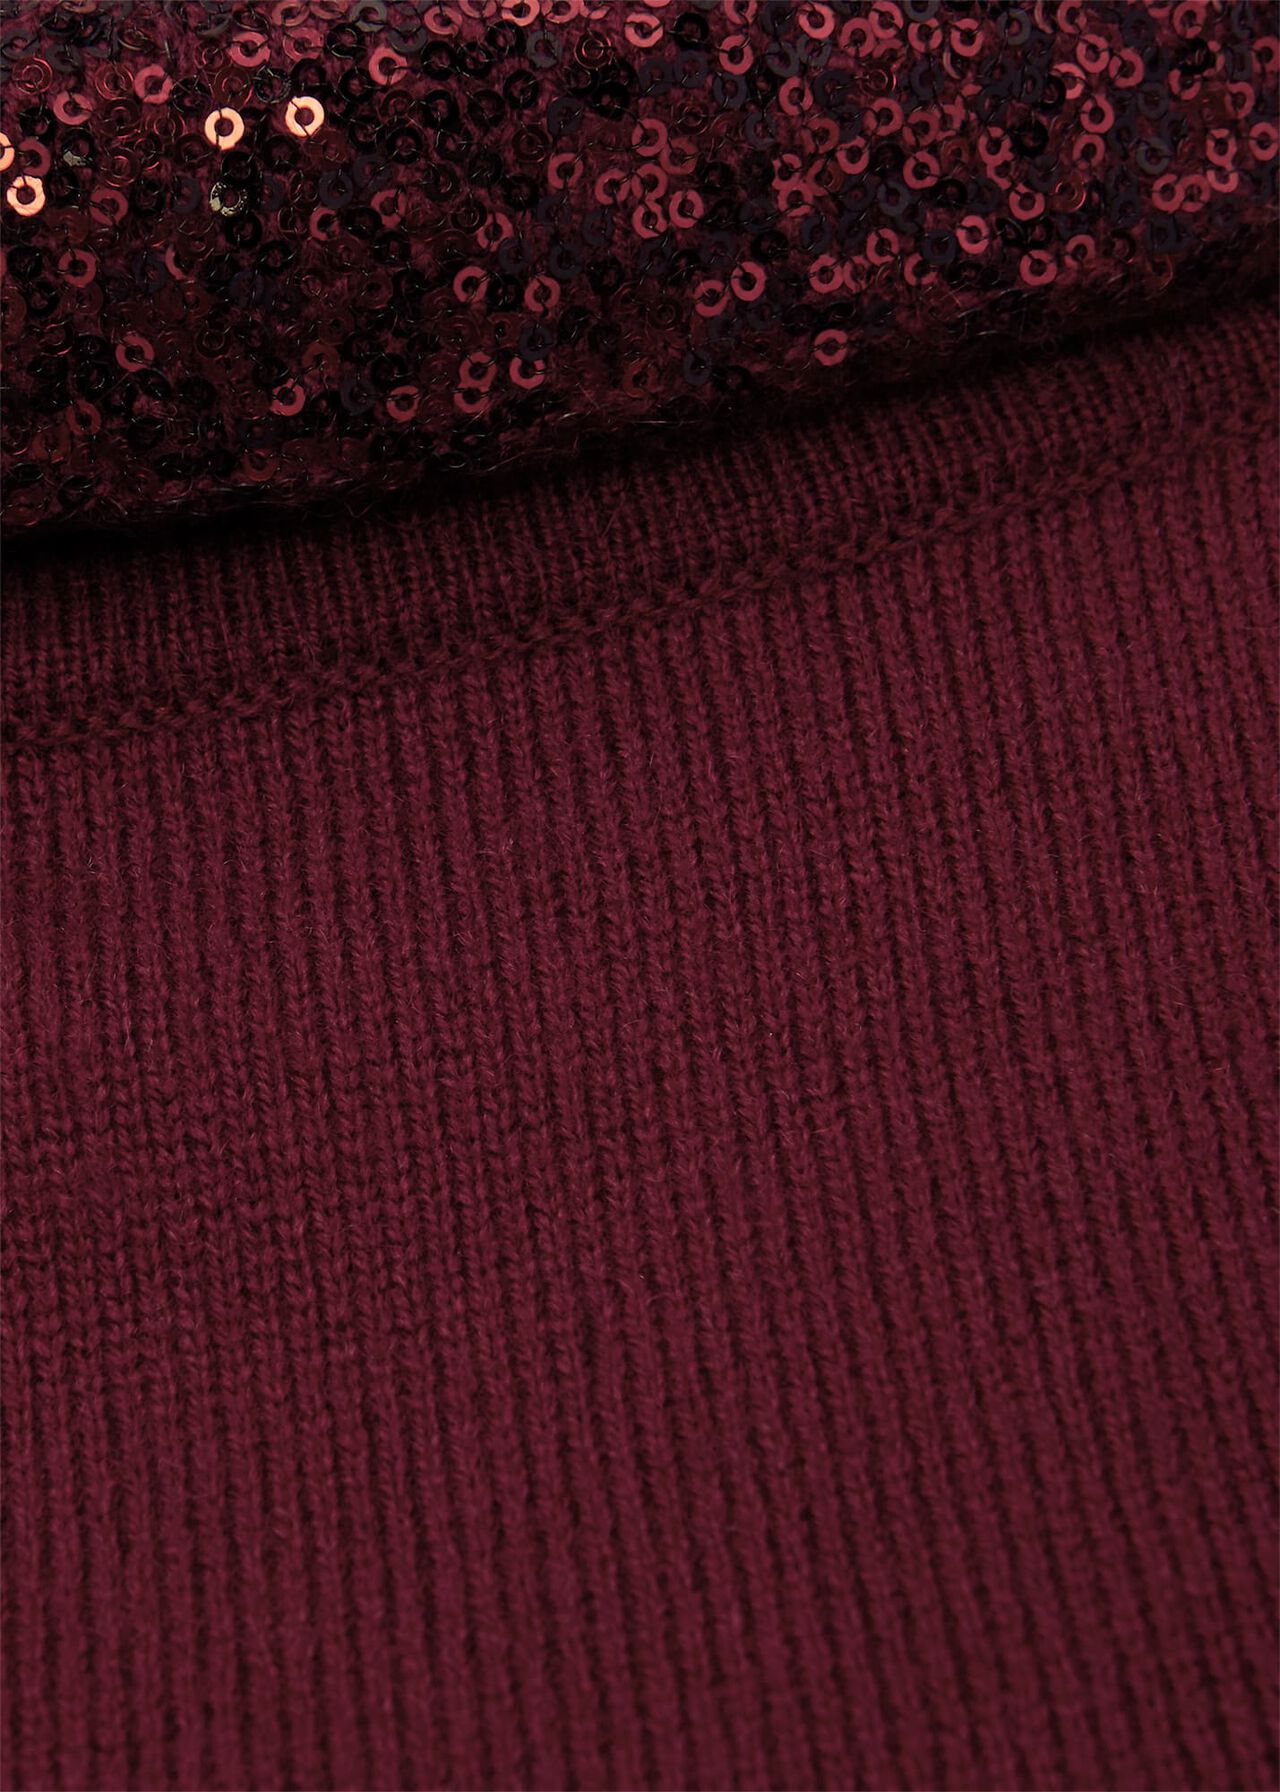 Esther Sequin Wool Cashmere Sweater, Burgundy, hi-res